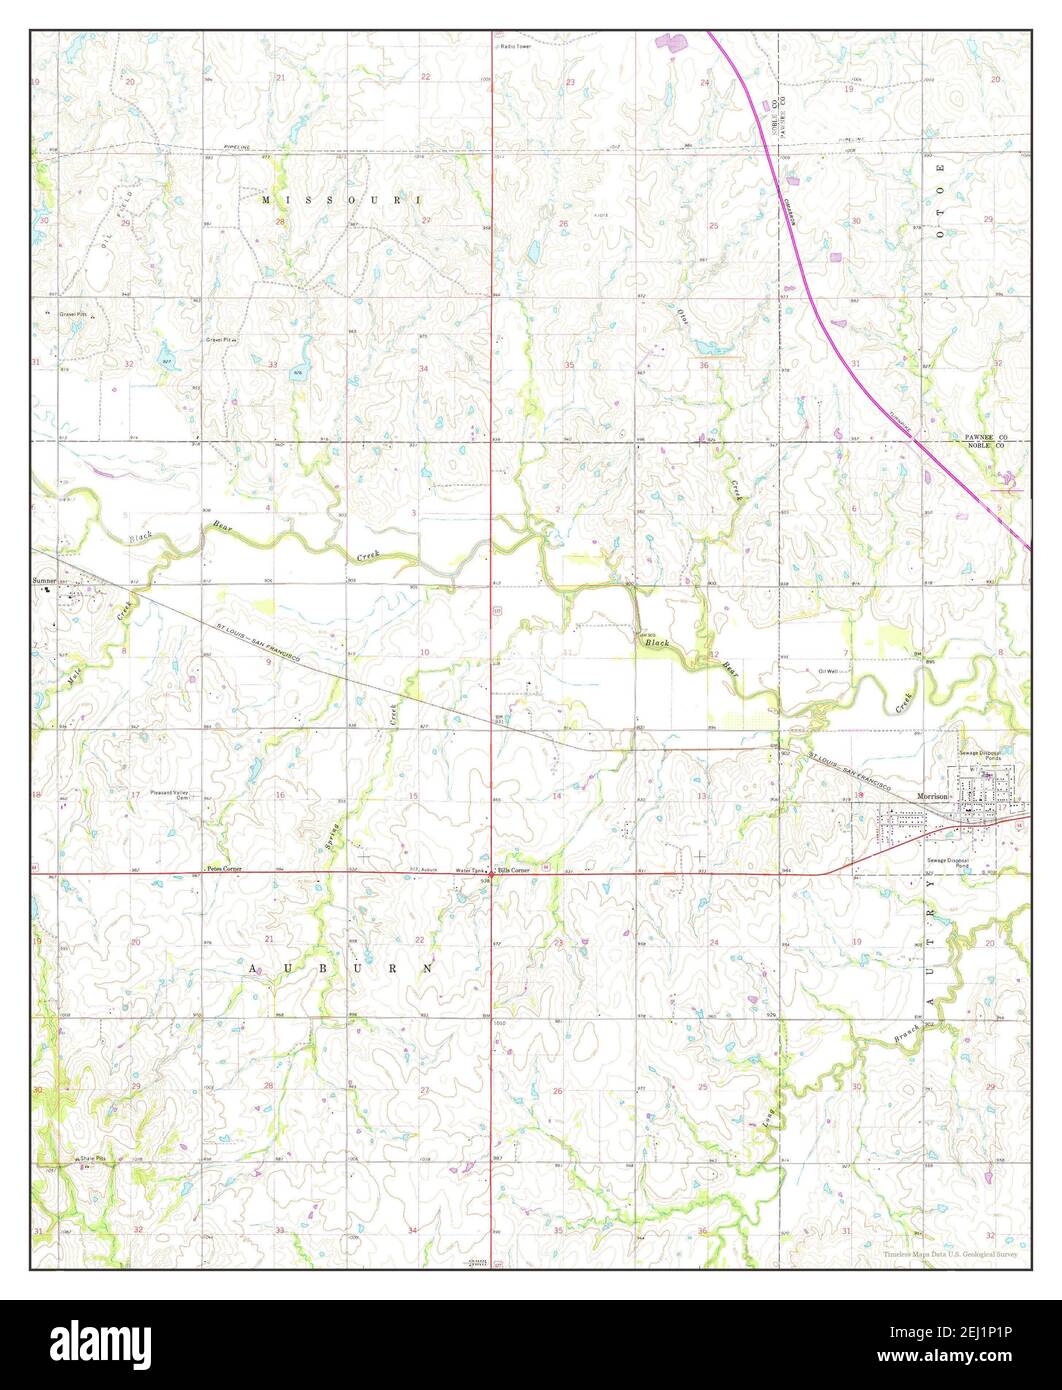 Morrison Oklahoma Map 1972 124000 United States Of America By Timeless Maps Data Us Geological Survey 2EJ1P1P 